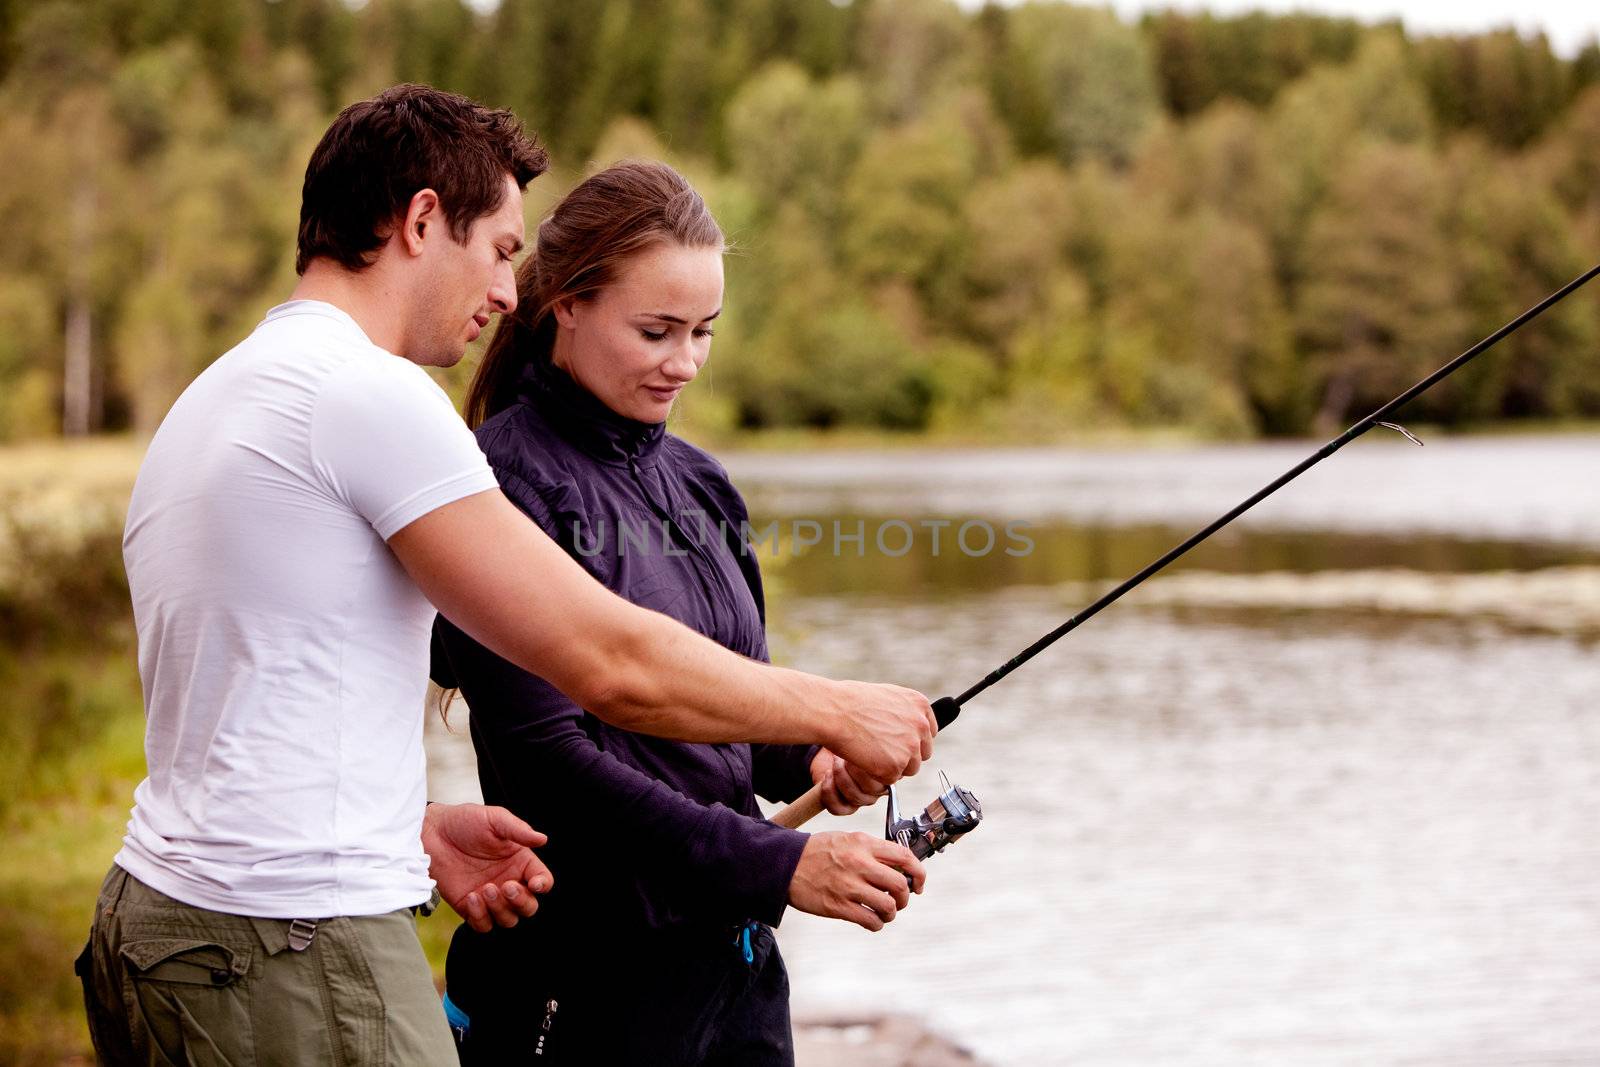 A man showing a woman how to fish